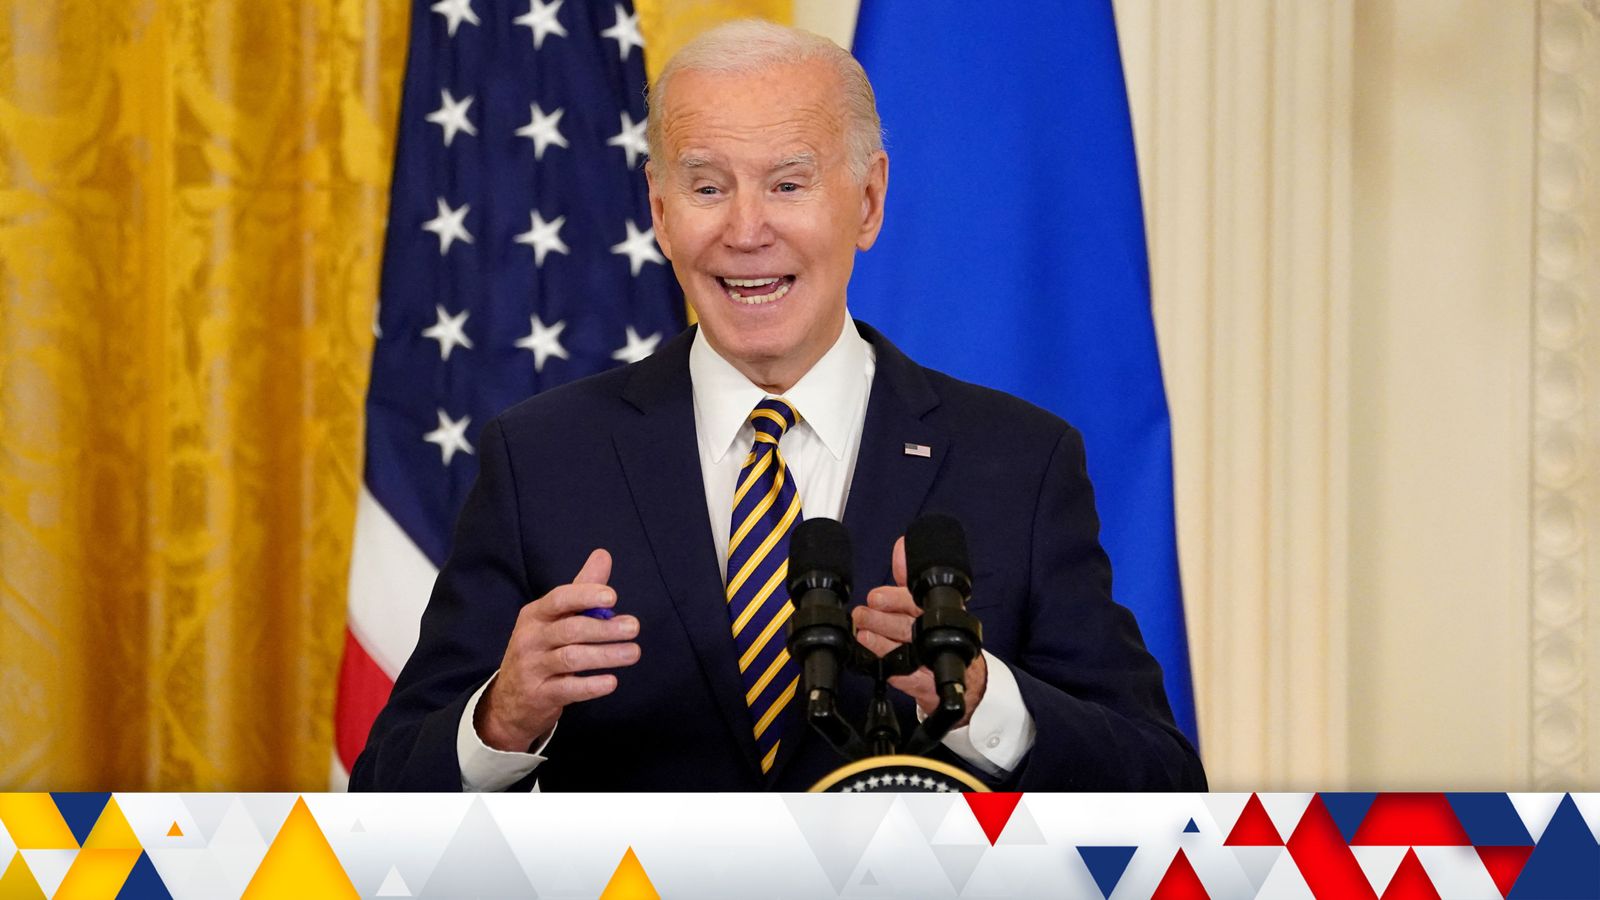 'Americans prepared to stand up to bullies': Joe Biden 'not worried' about international support for Ukraine